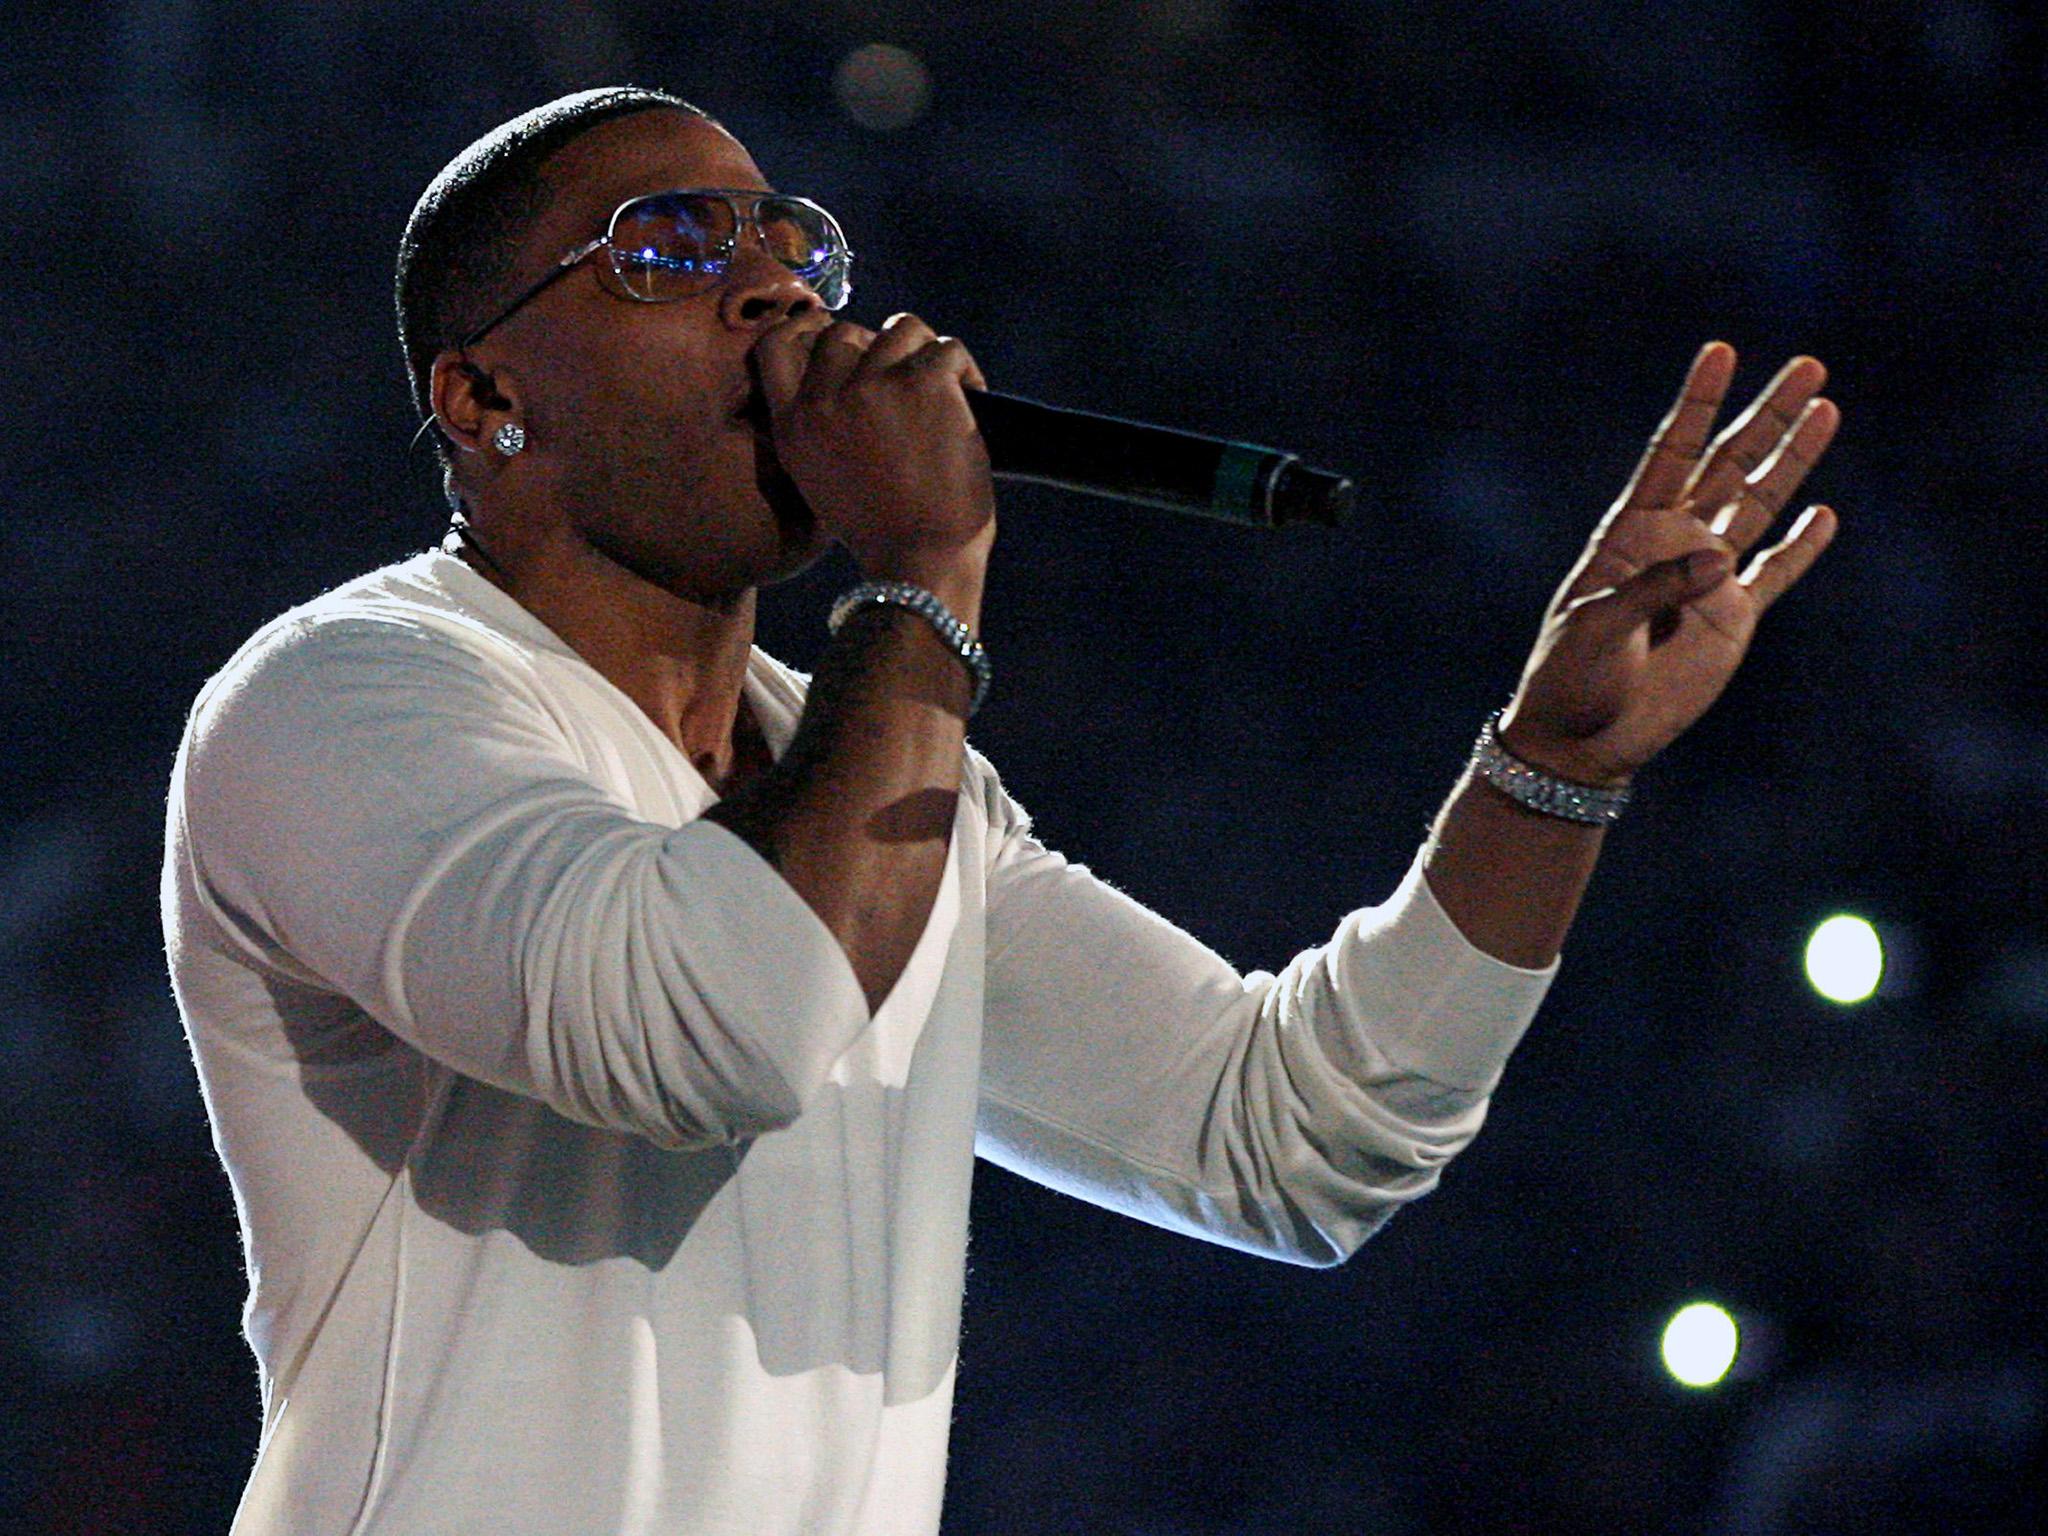 Nelly denied a woman's accusation that he raped her on his tour bus